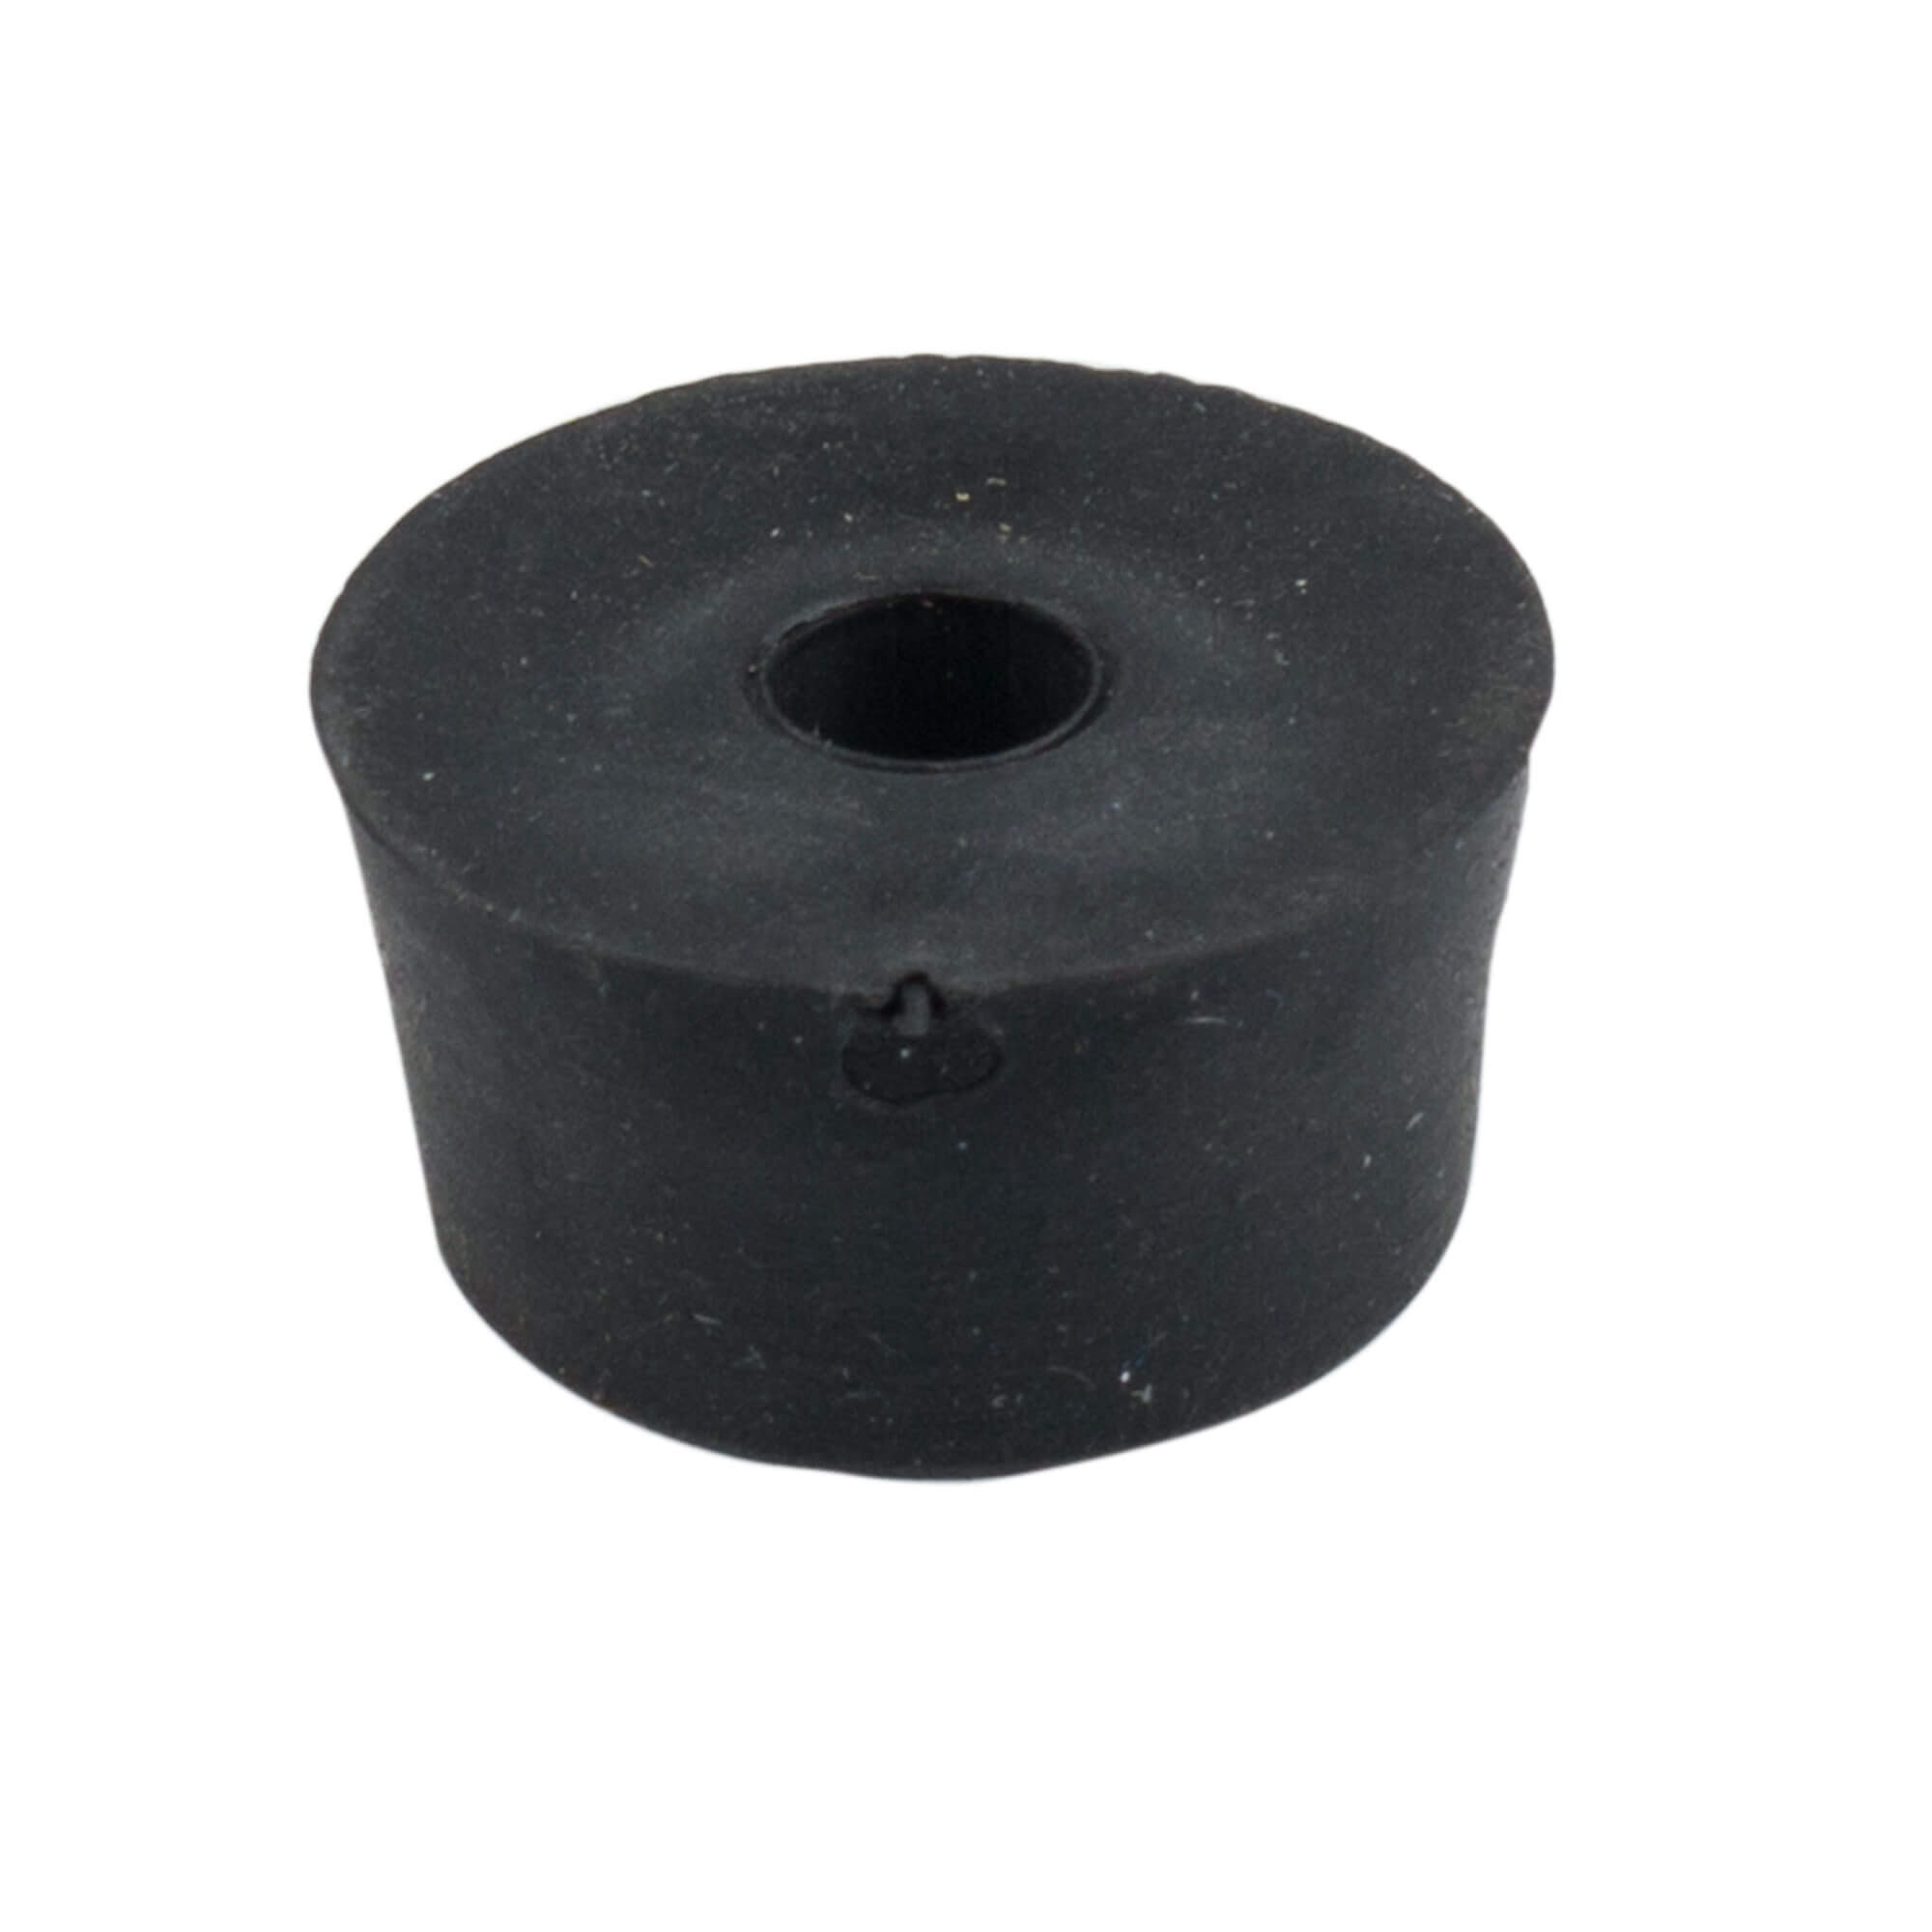 Rubber base - spare part for Cancan manual juicer